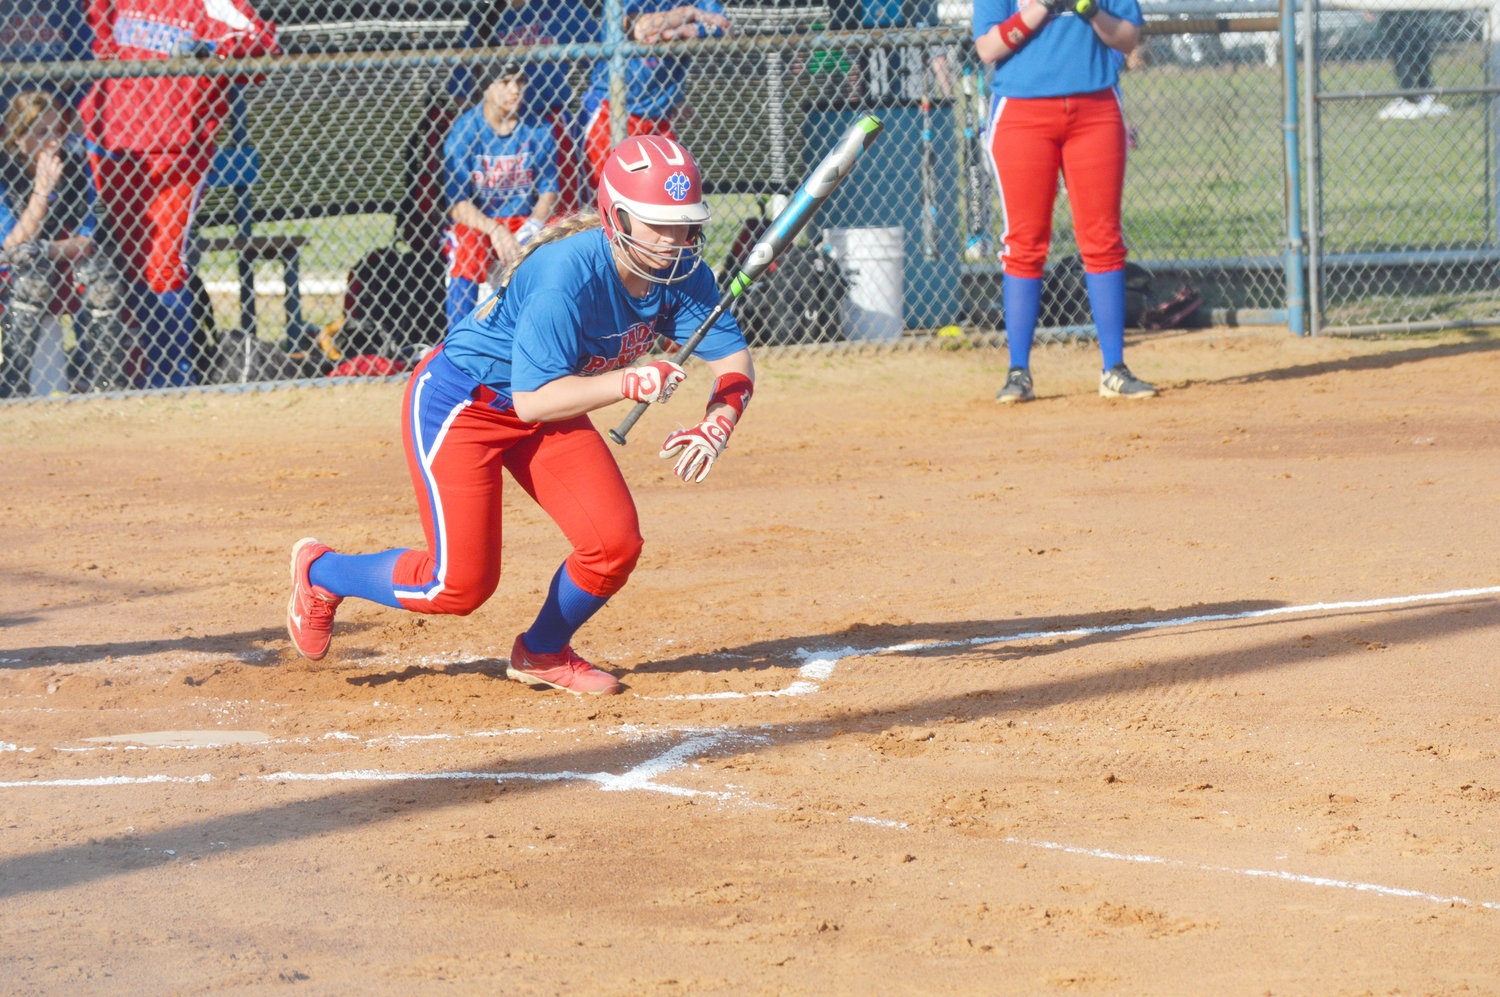 Alba-Golden’s Brianna Weissert takes off after getting a hit in the Lady Panthers’ close win over Quitman last week. (Monitor photos by Larry Tucker)